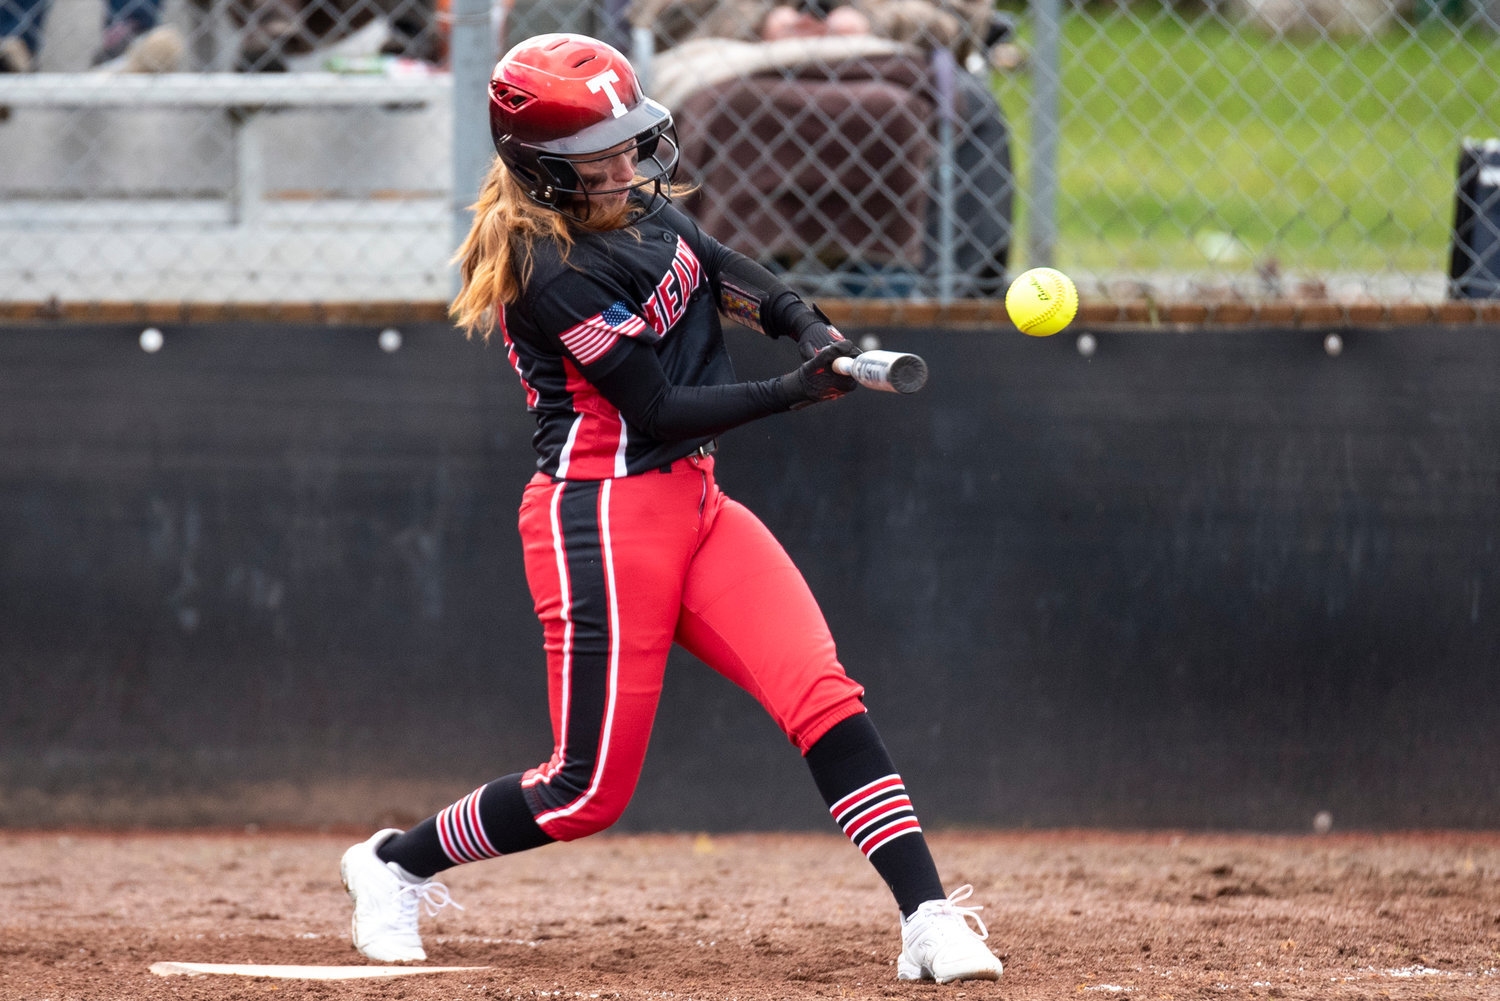 Tenino's Abby Severse connects on a Toledo pitch during a home game on March 16.